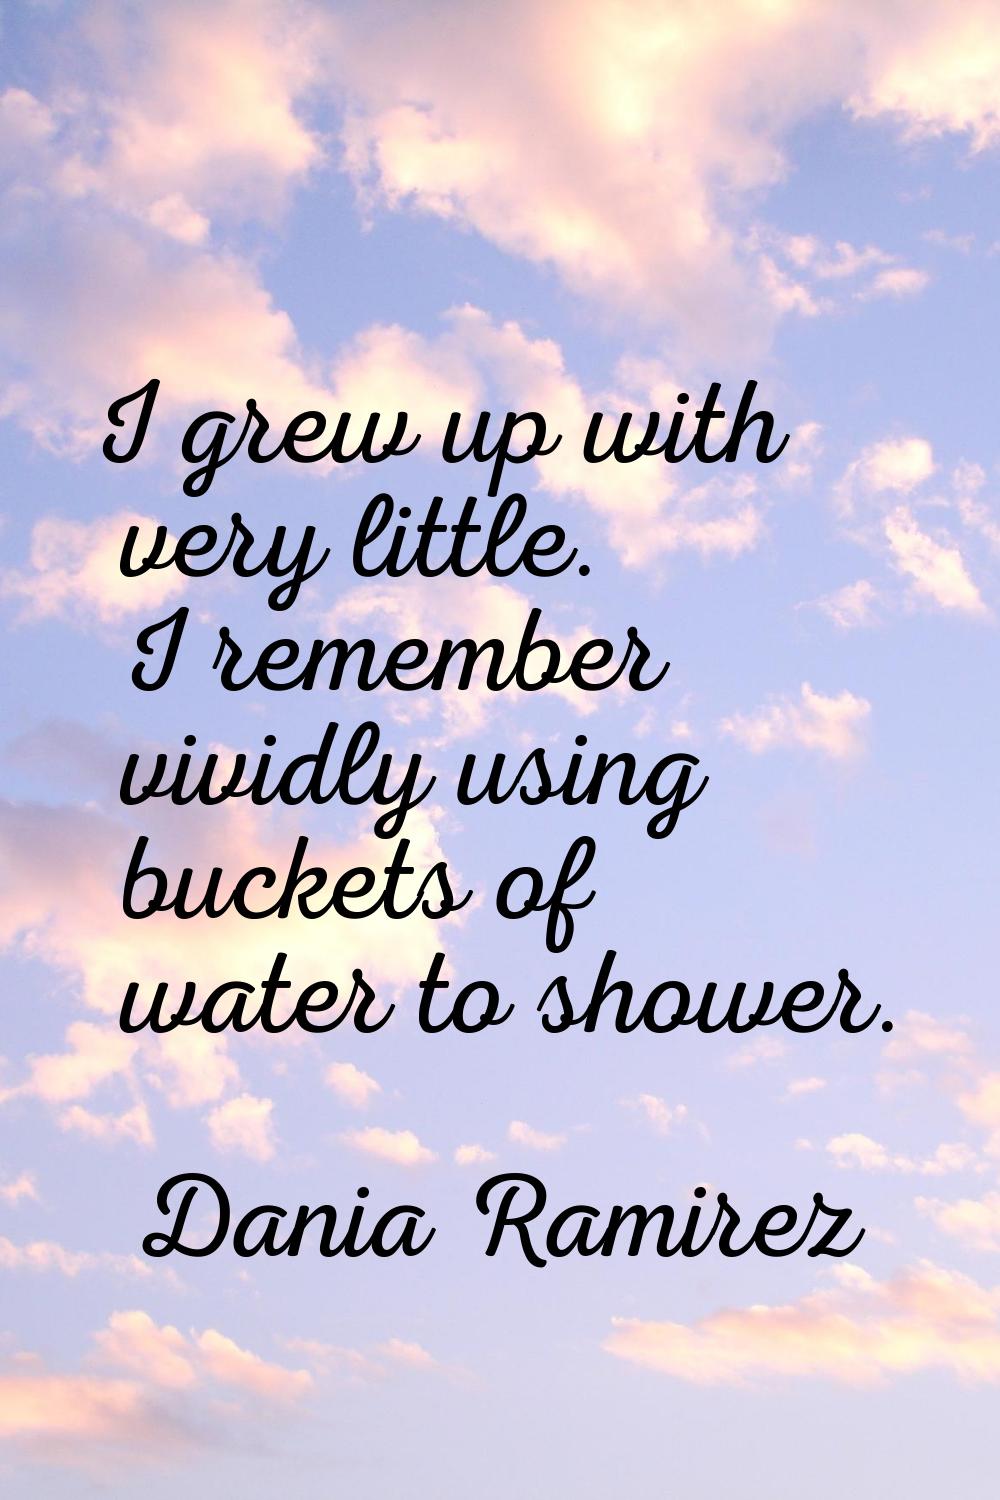 I grew up with very little. I remember vividly using buckets of water to shower.